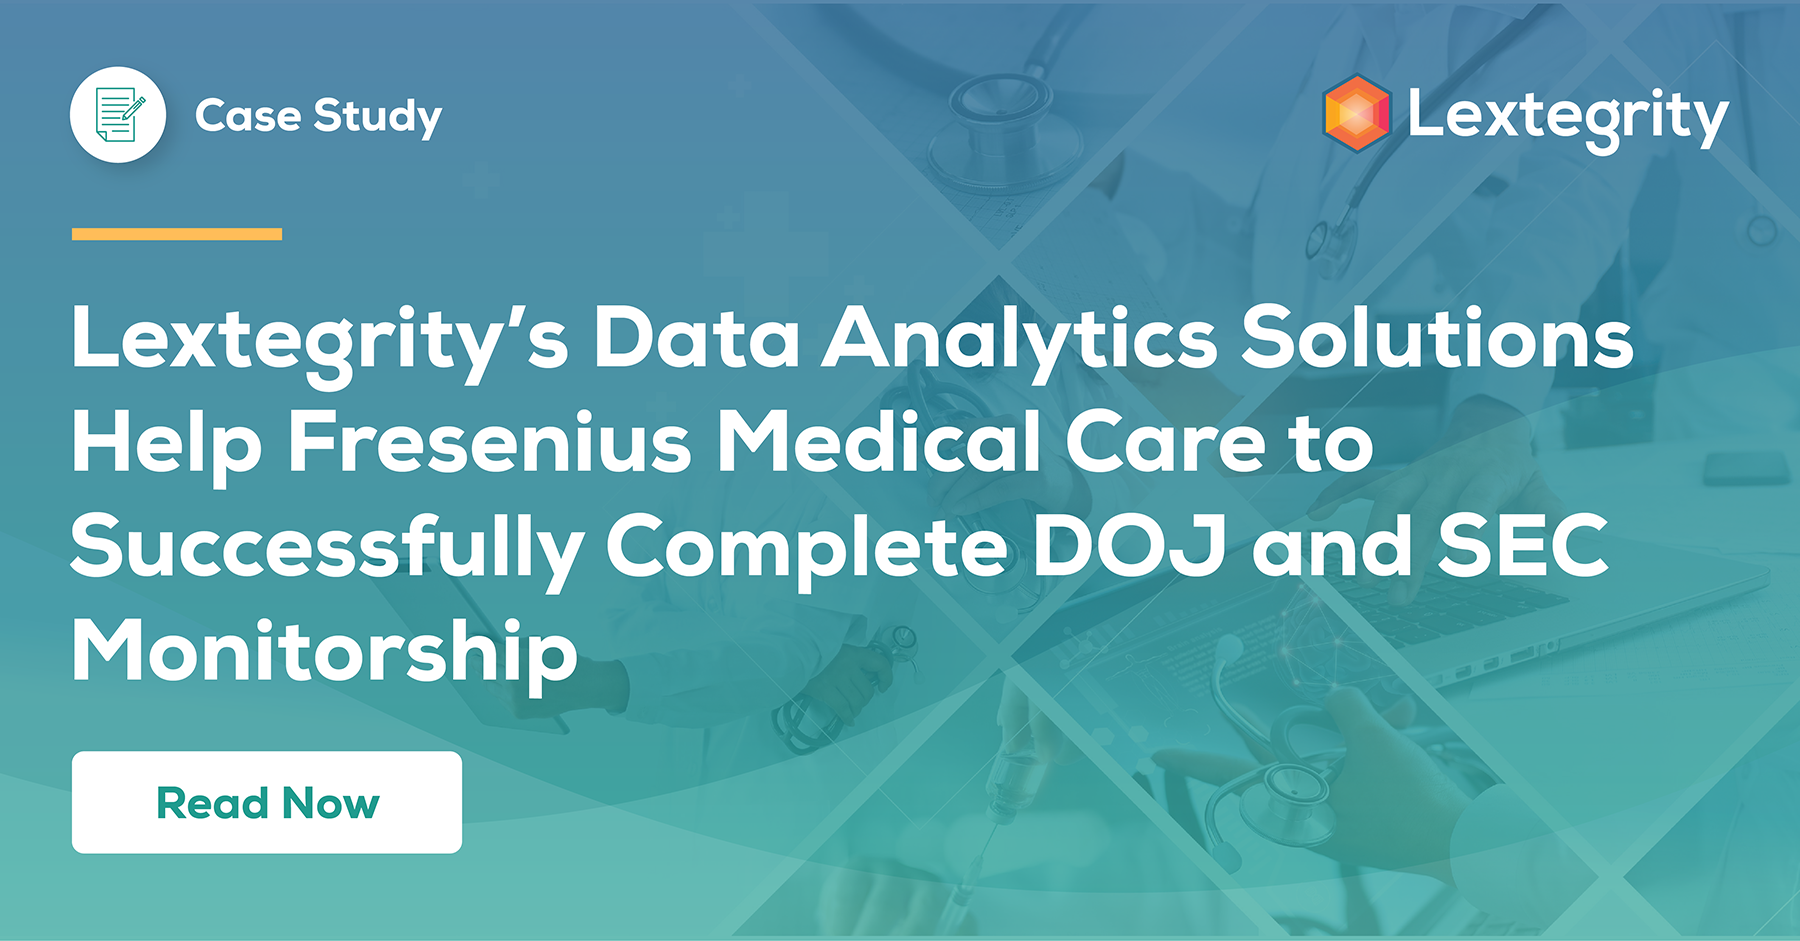 Lextegrity’s Data Analytics Solutions Help Fresenius Medical Care to Successfully Complete DOJ and SEC Monitorship